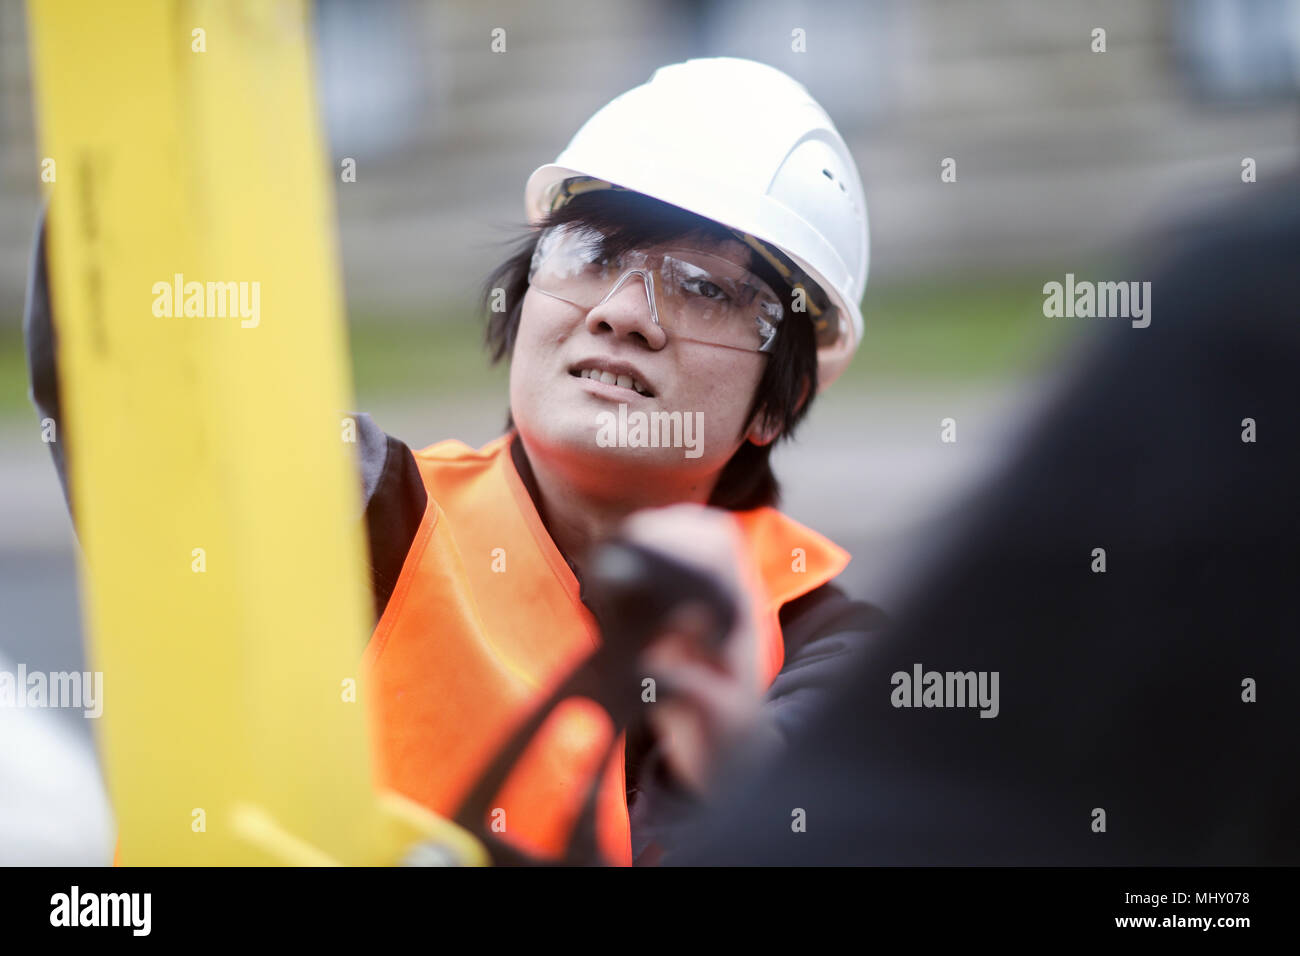 Young construction worker wearing hard hat Stock Photo